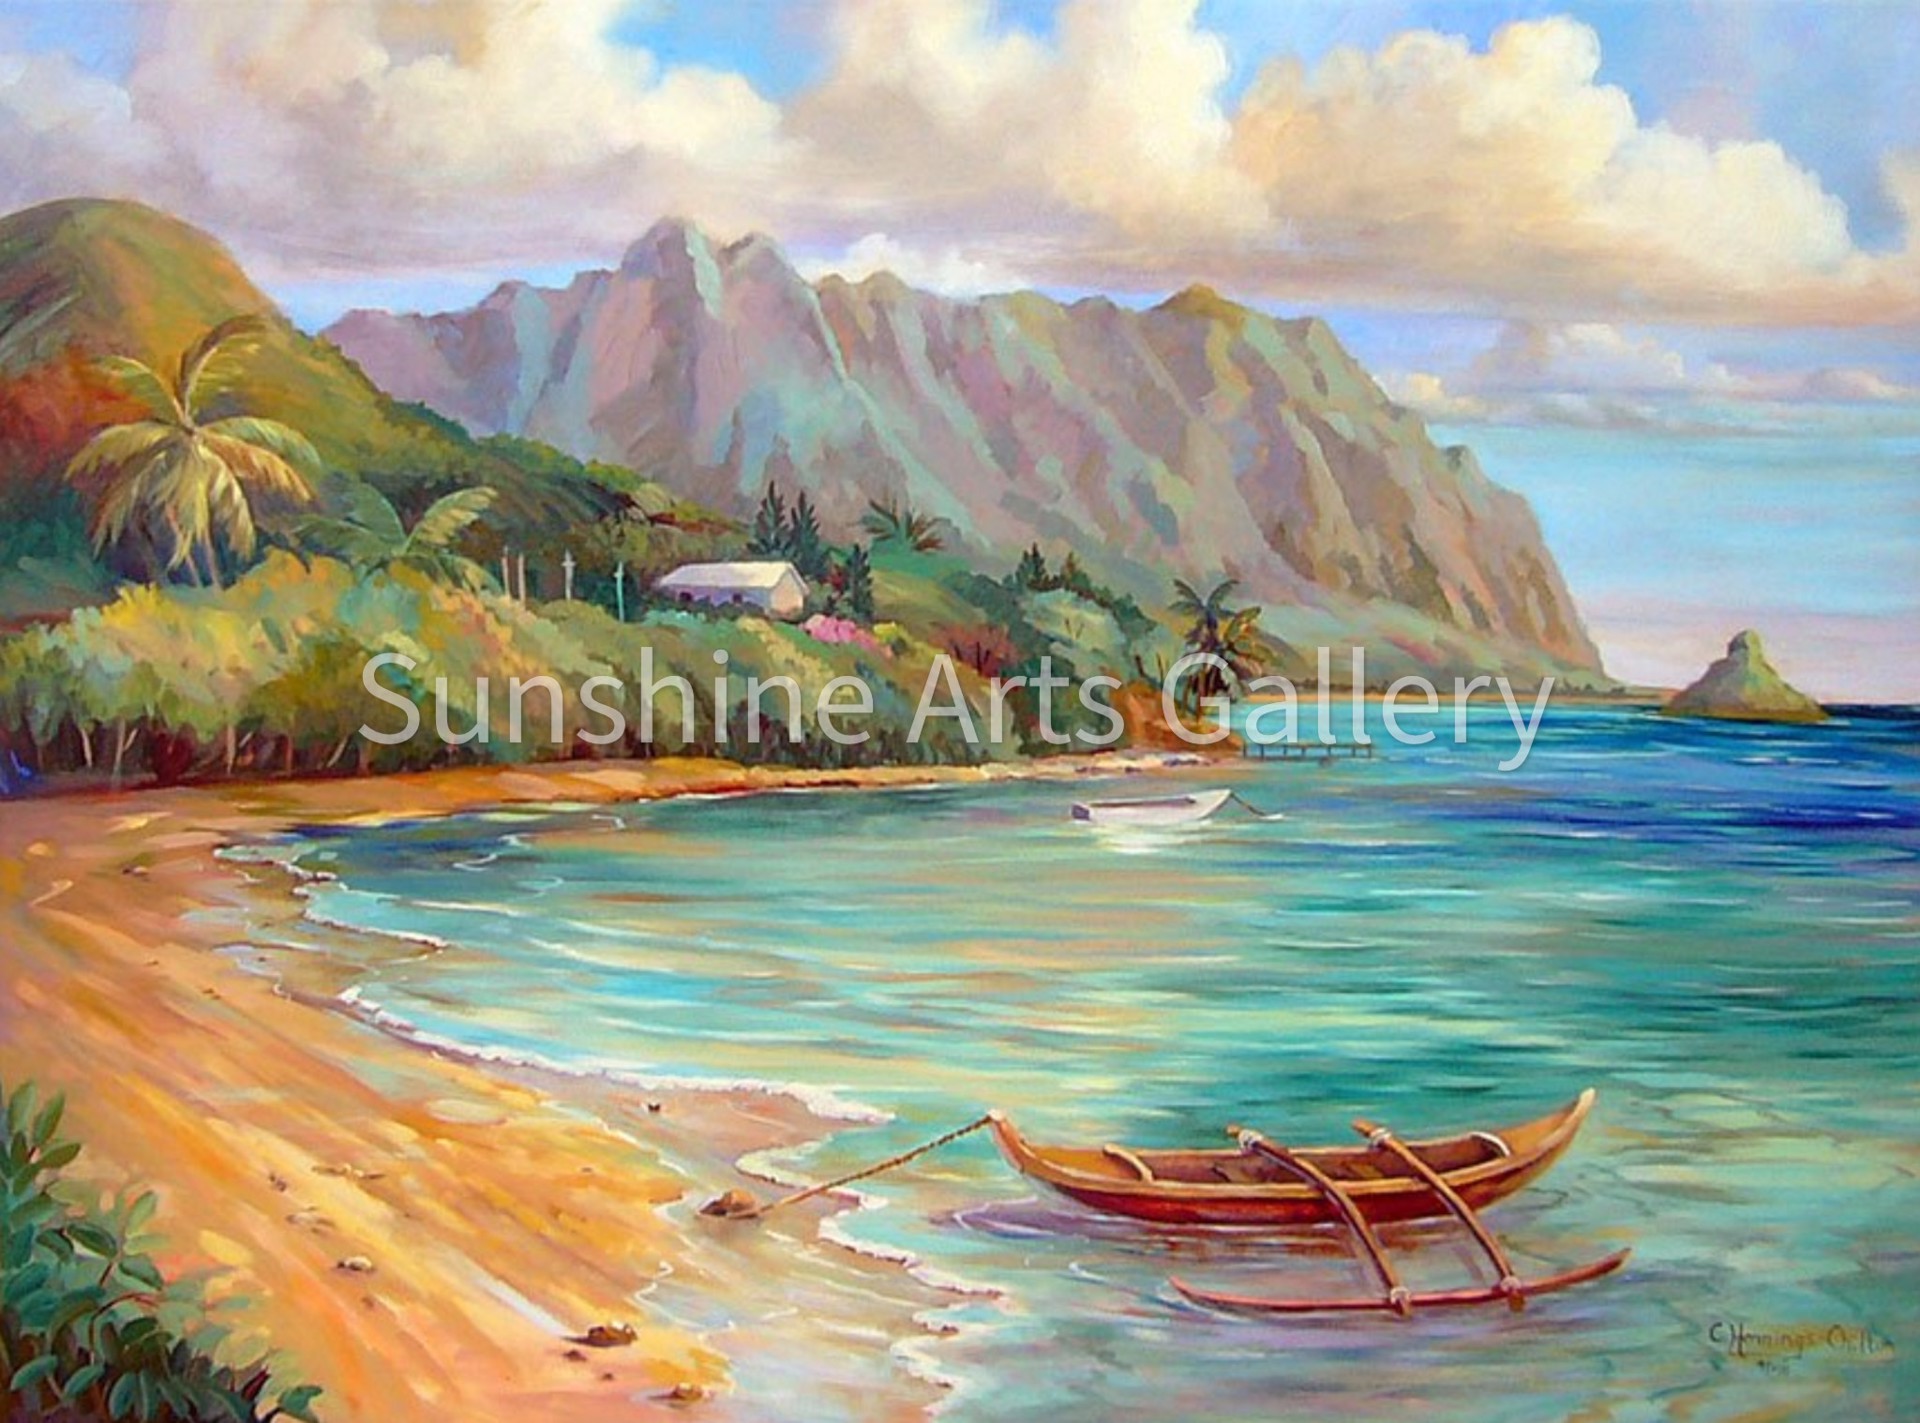 Kāneʻohe Bay by Connie Hennings-Chilton